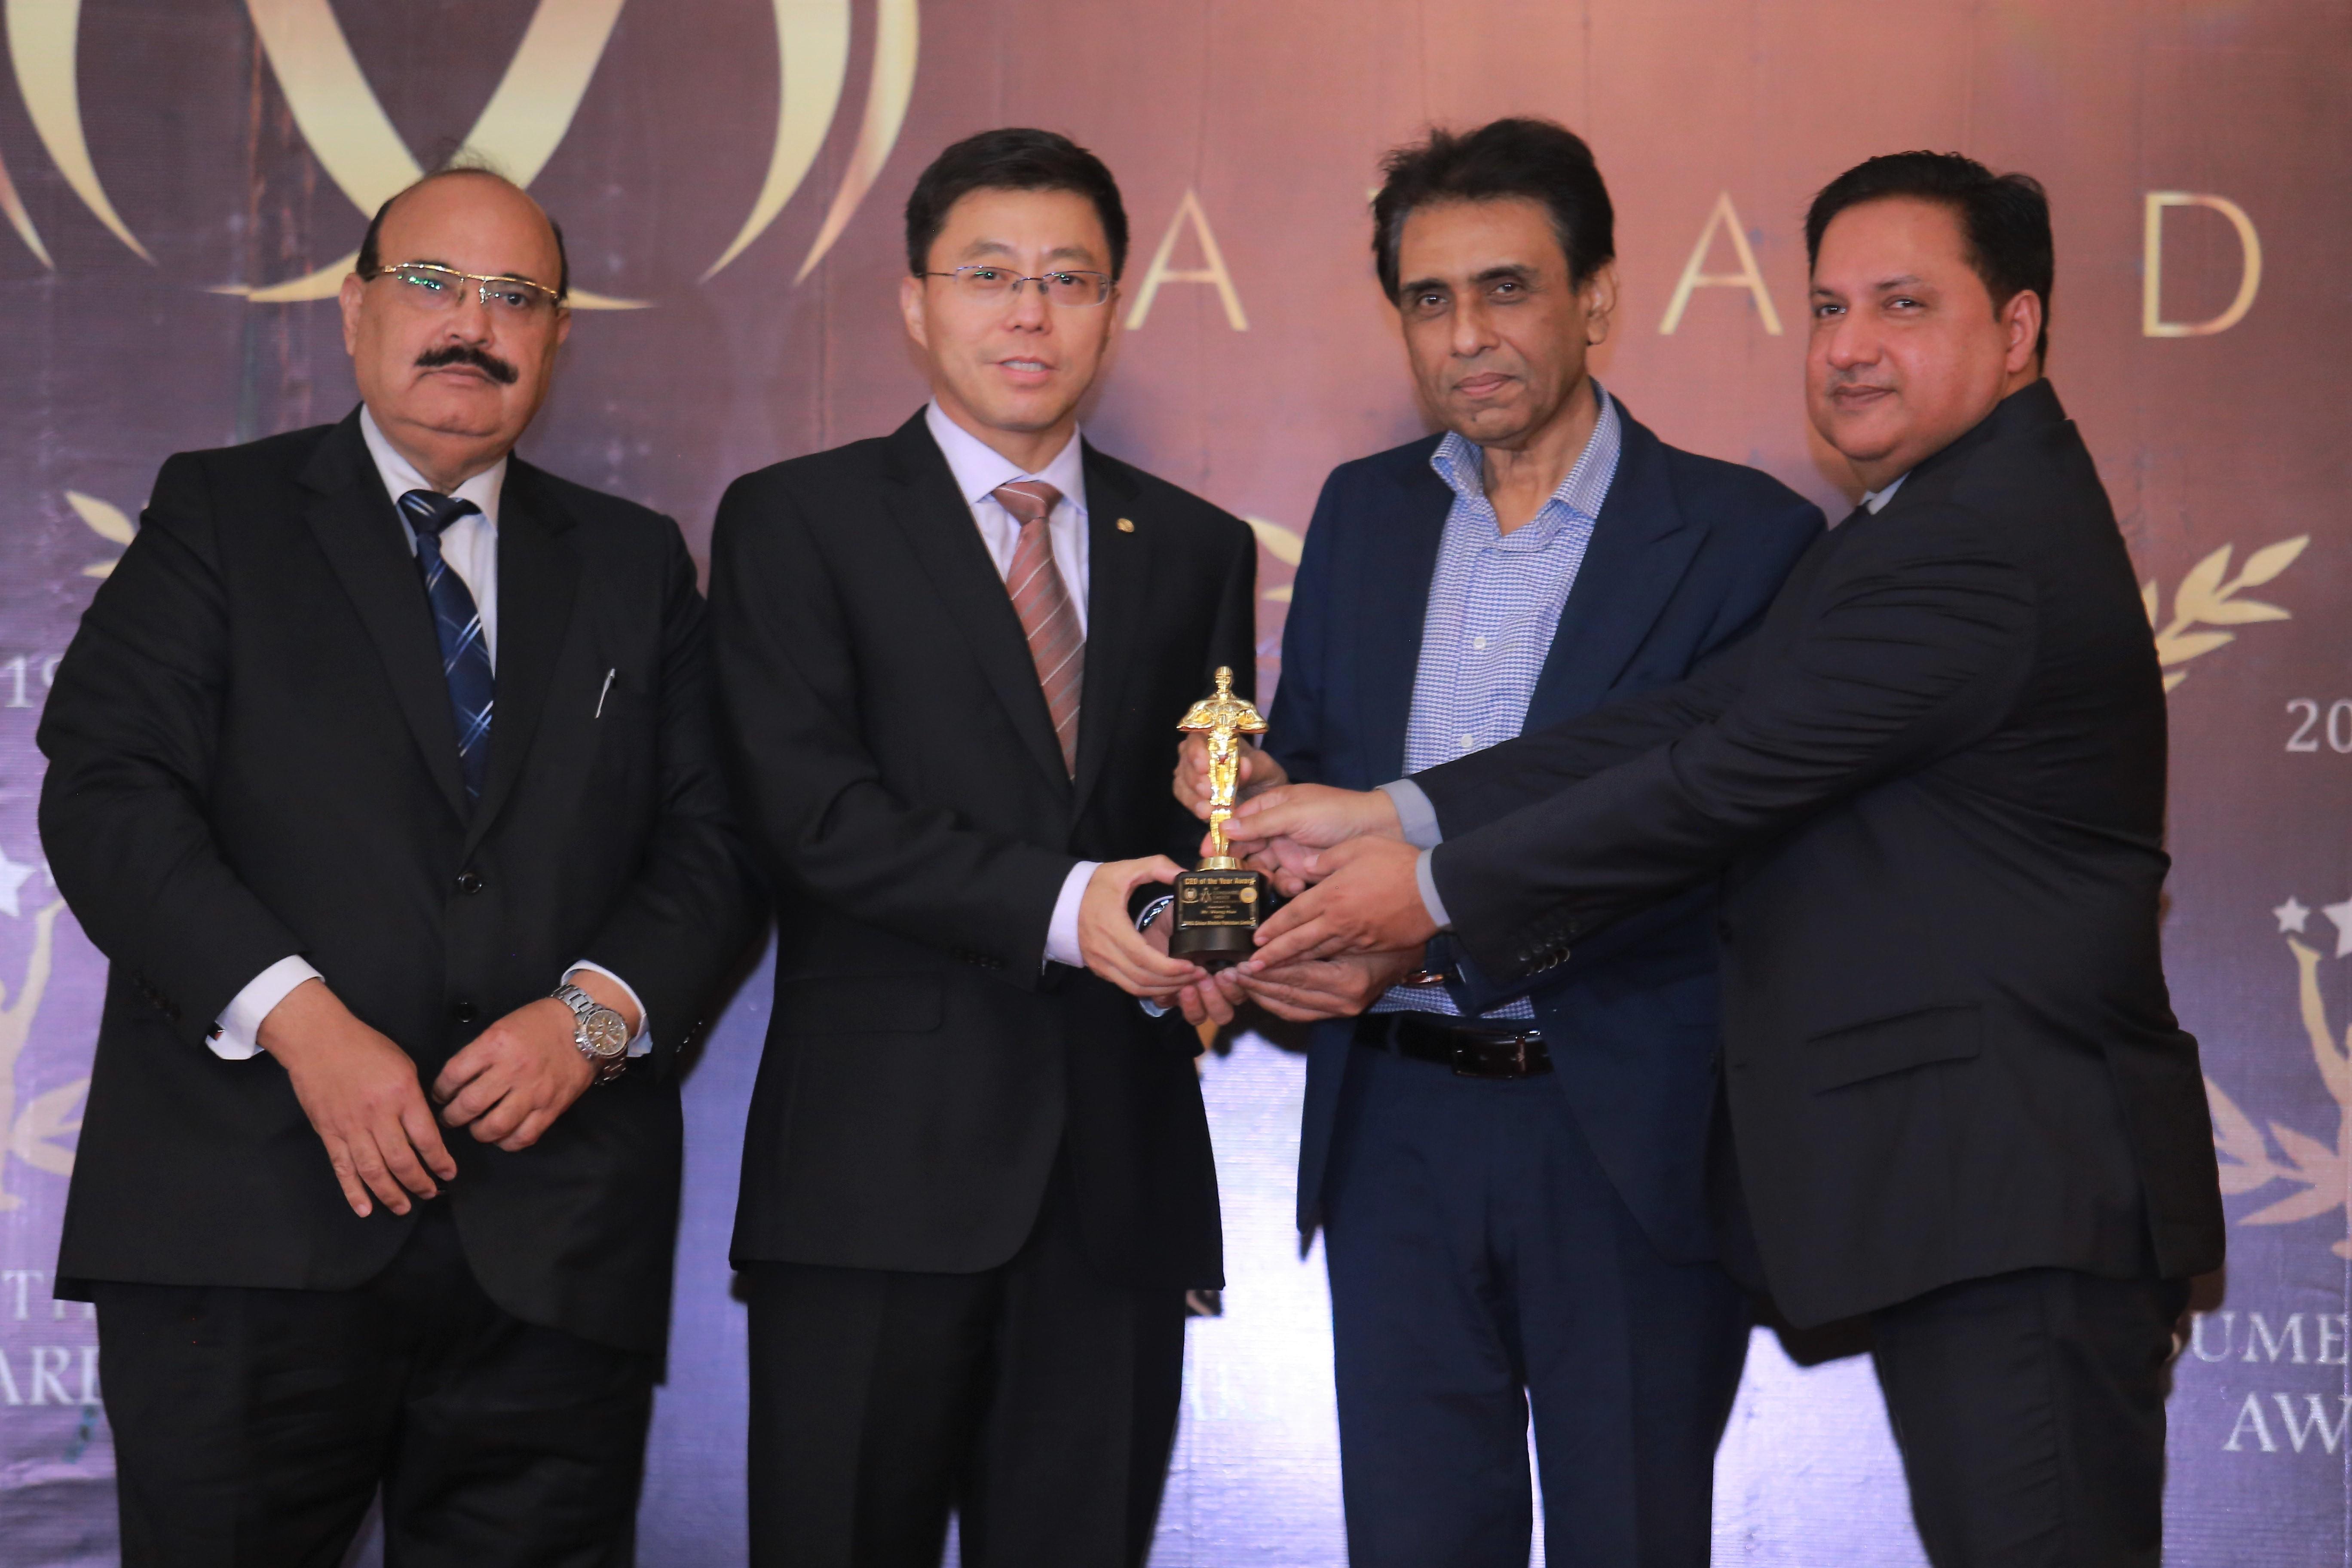 Zong 4G bags Two Consumer Choice Awards